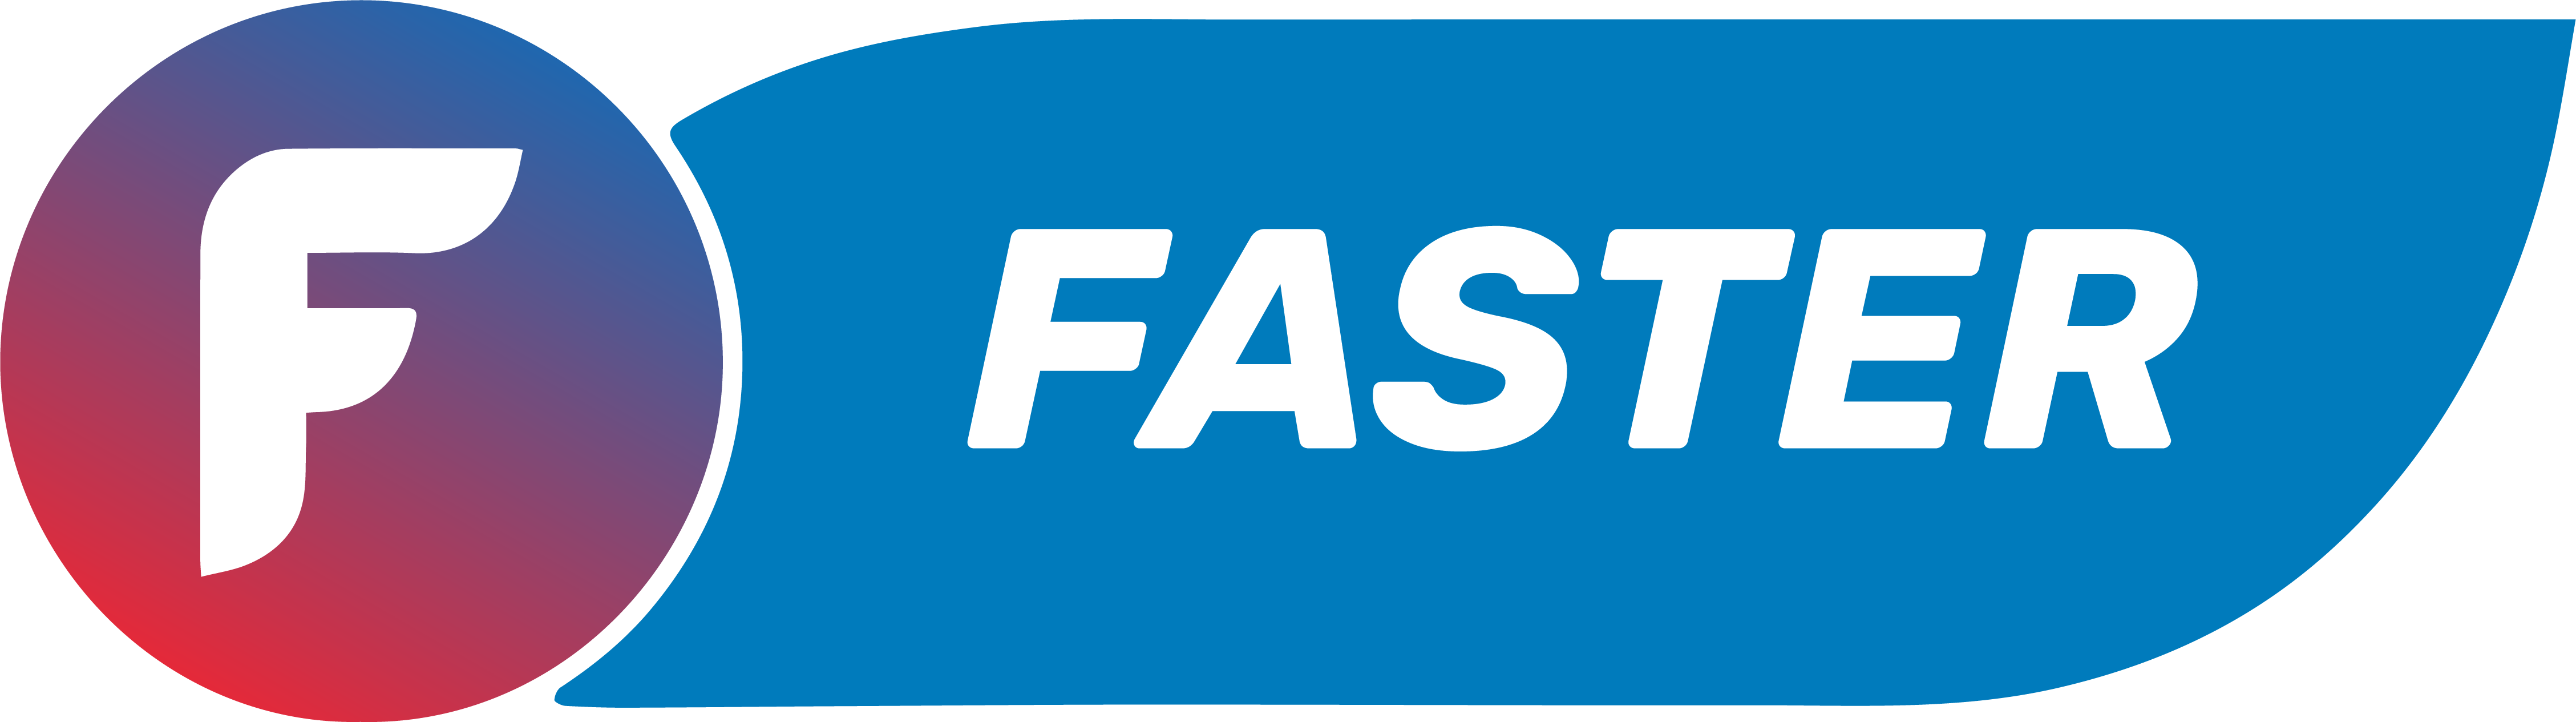 FASTER.png